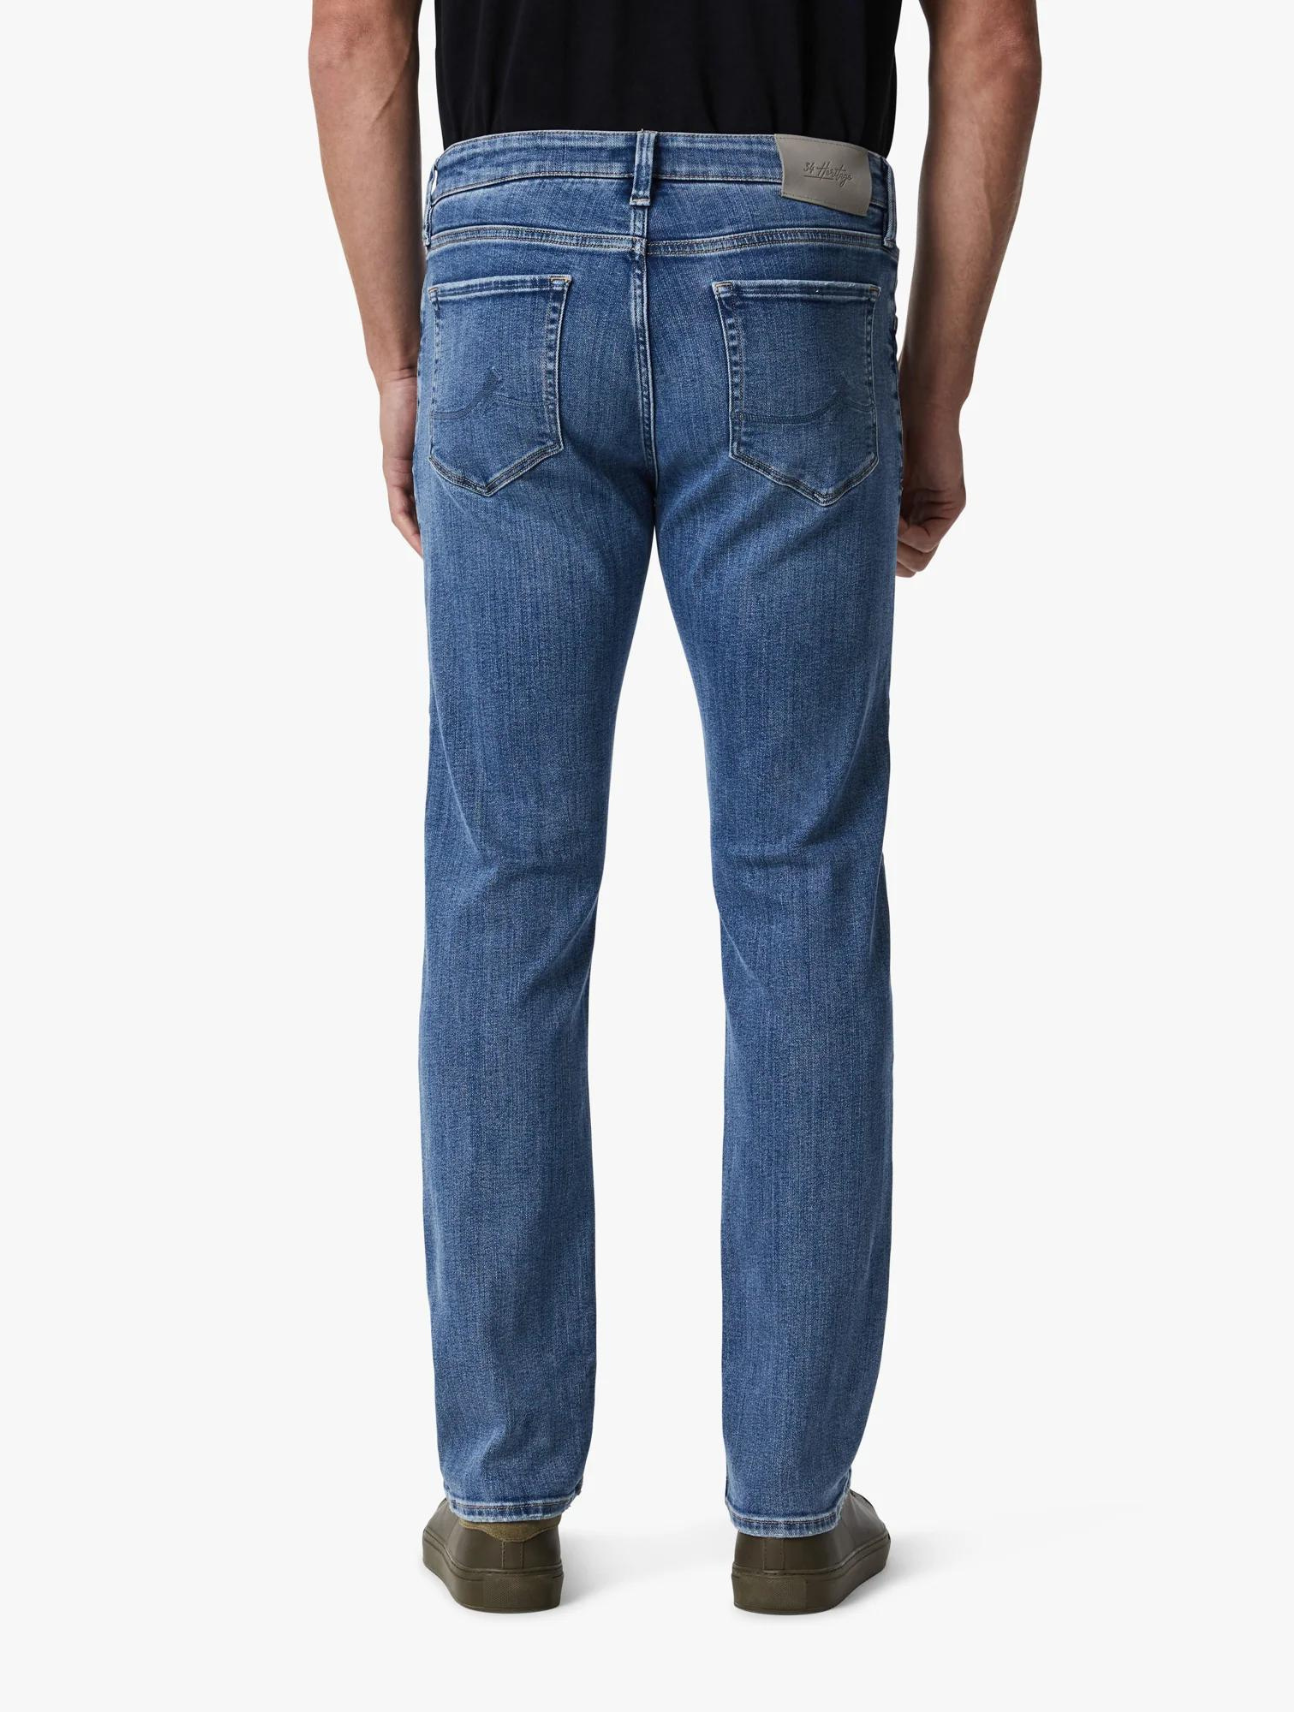 Courage Straight Leg Jeans